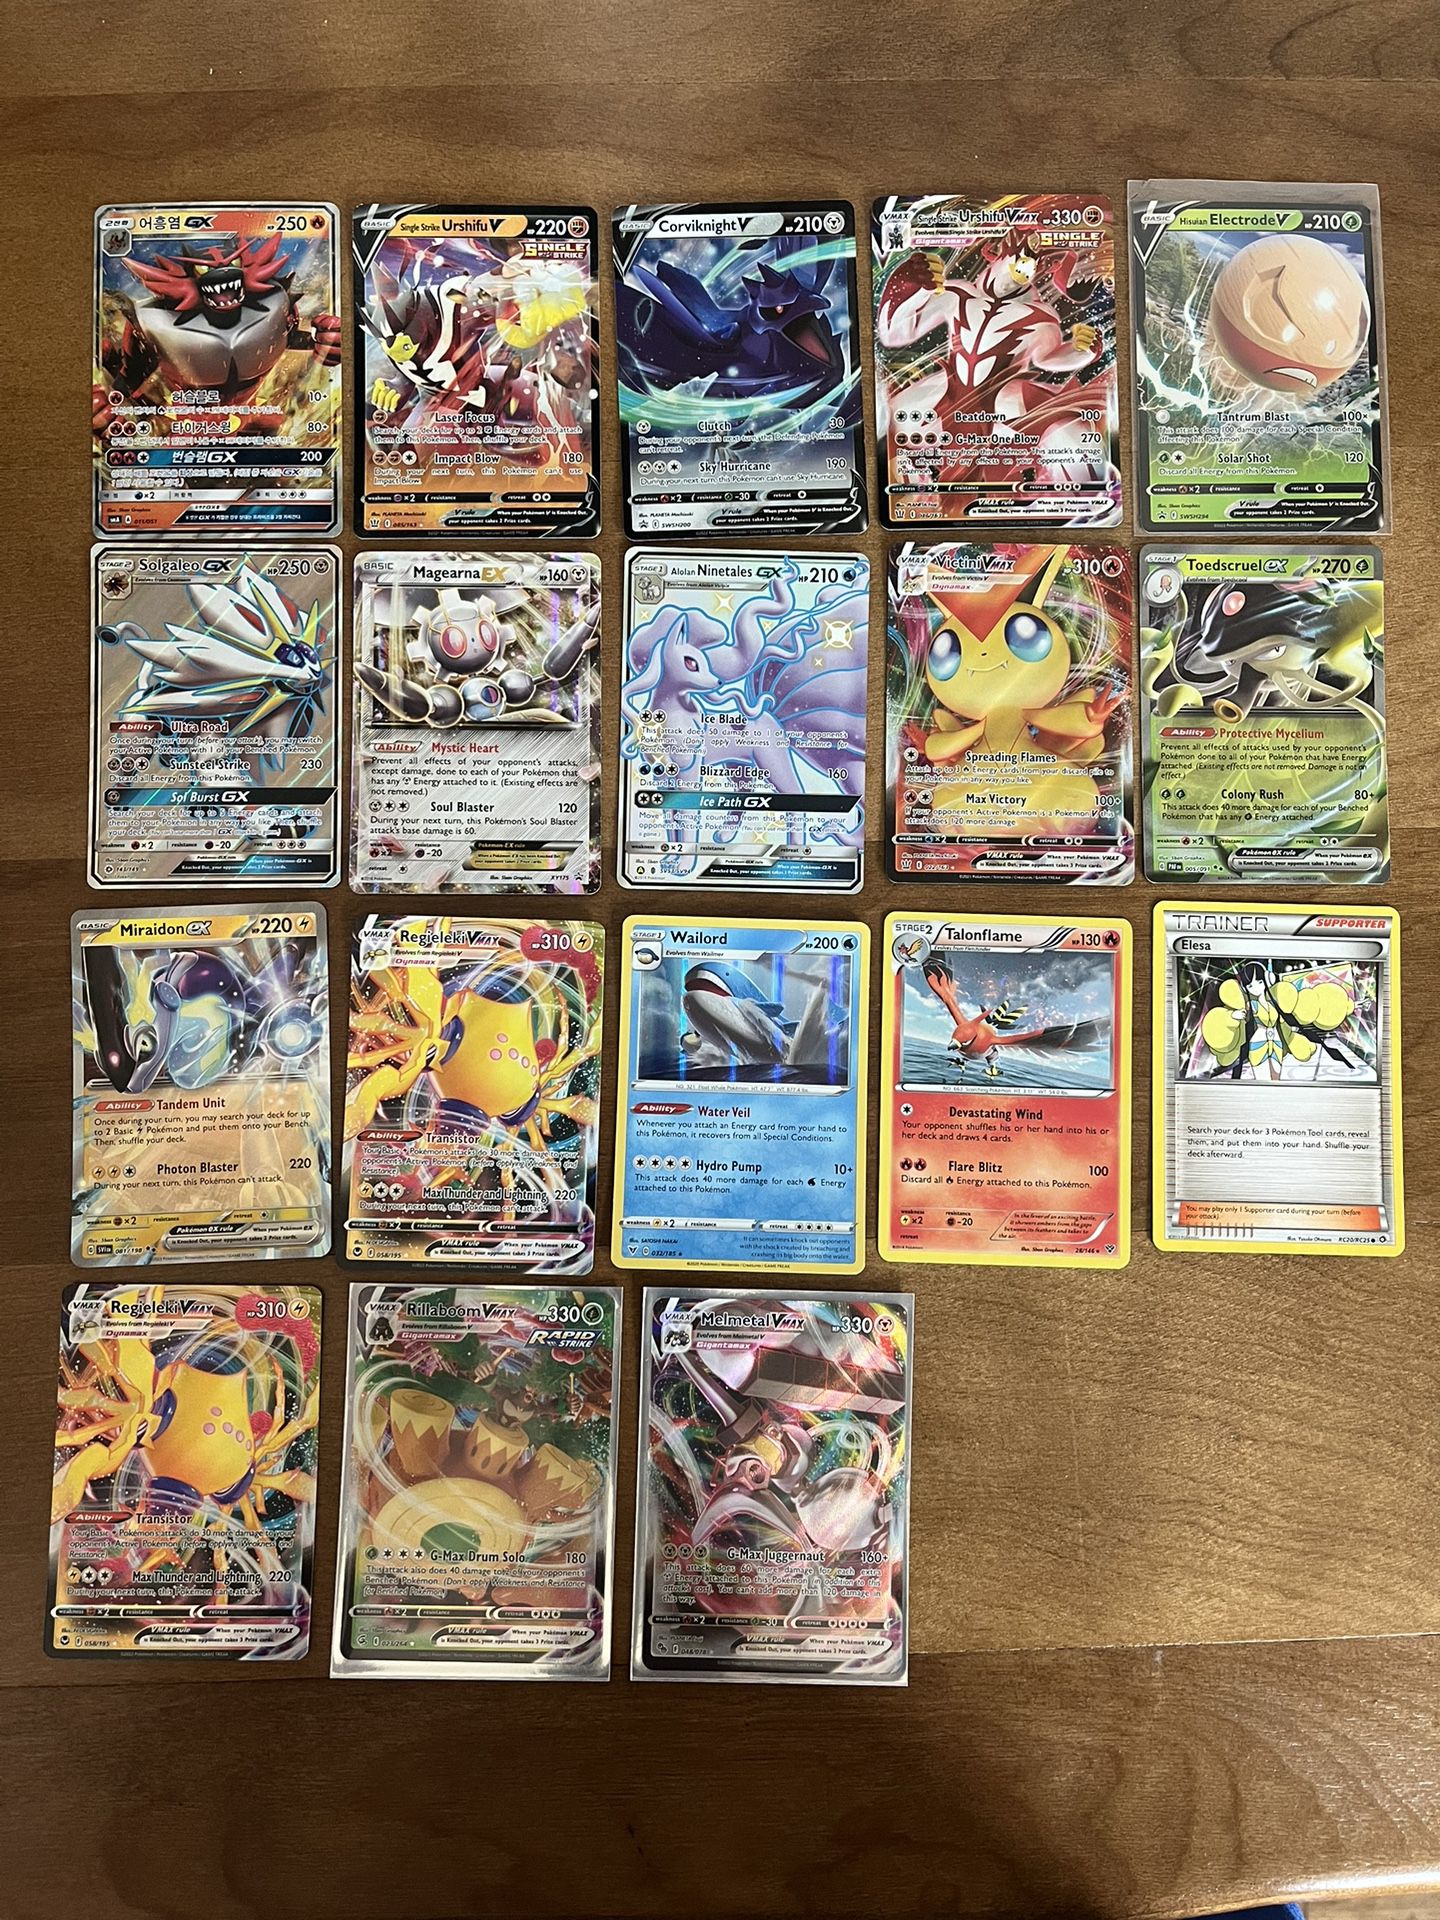 18 Assorted Pokemon Cards - Full Art, VMAX, Holo, And More!